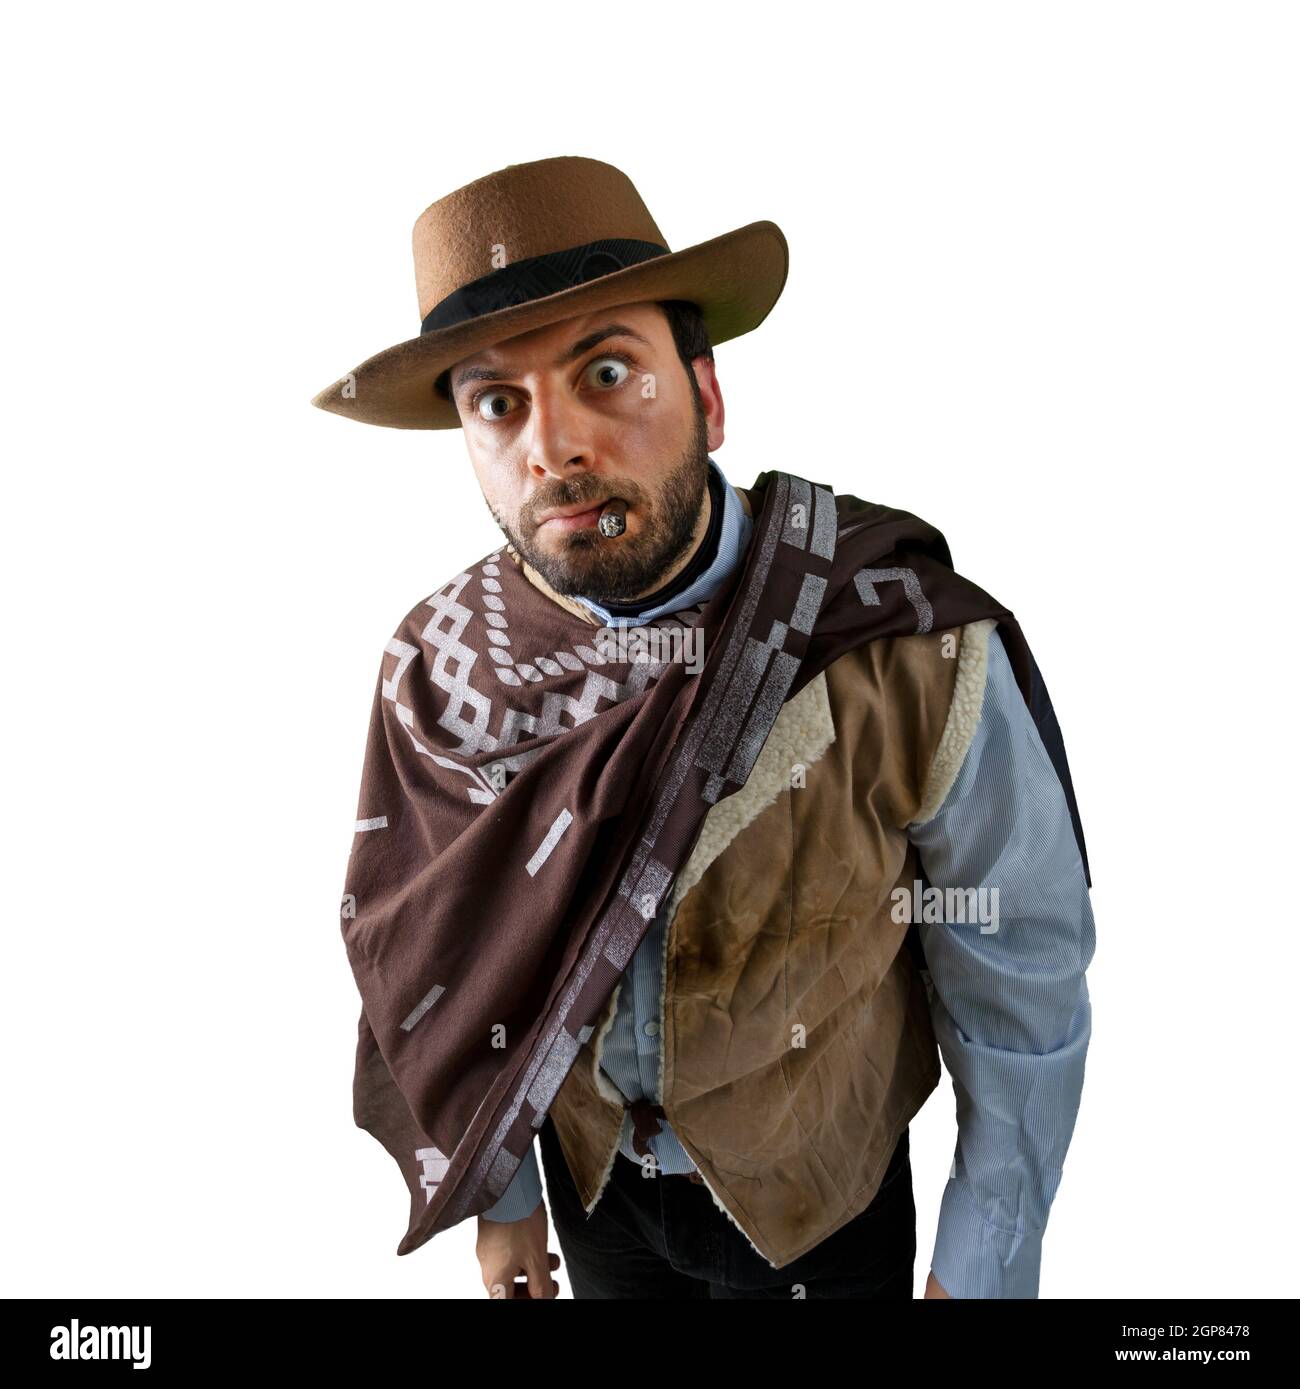 WOW Gunfighter in the old wild west on white background Stock Photo